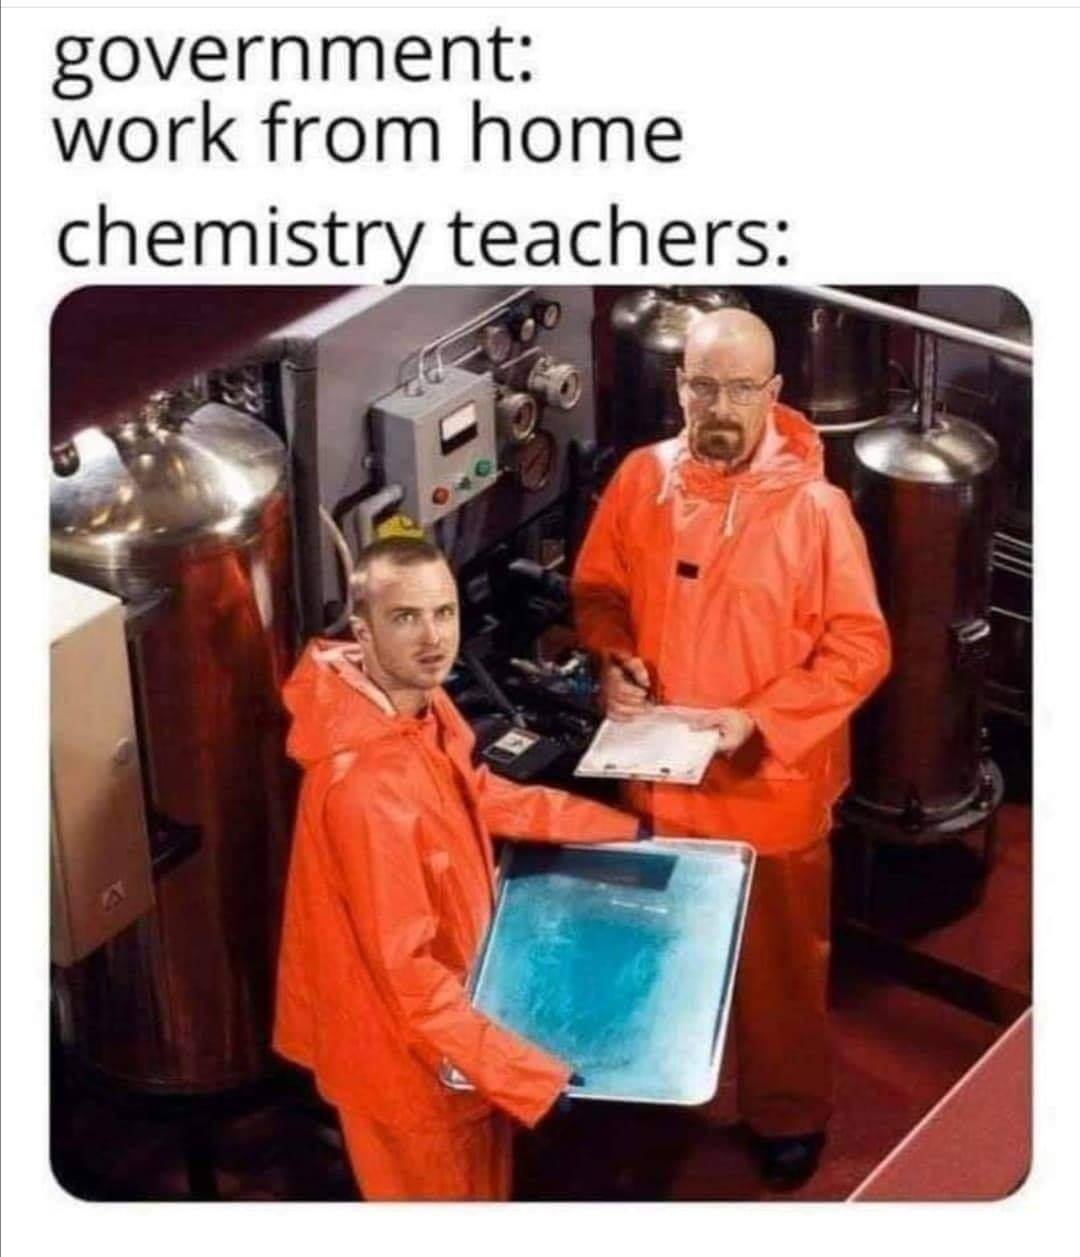 breaking bad meth - government work from home chemistry teachers